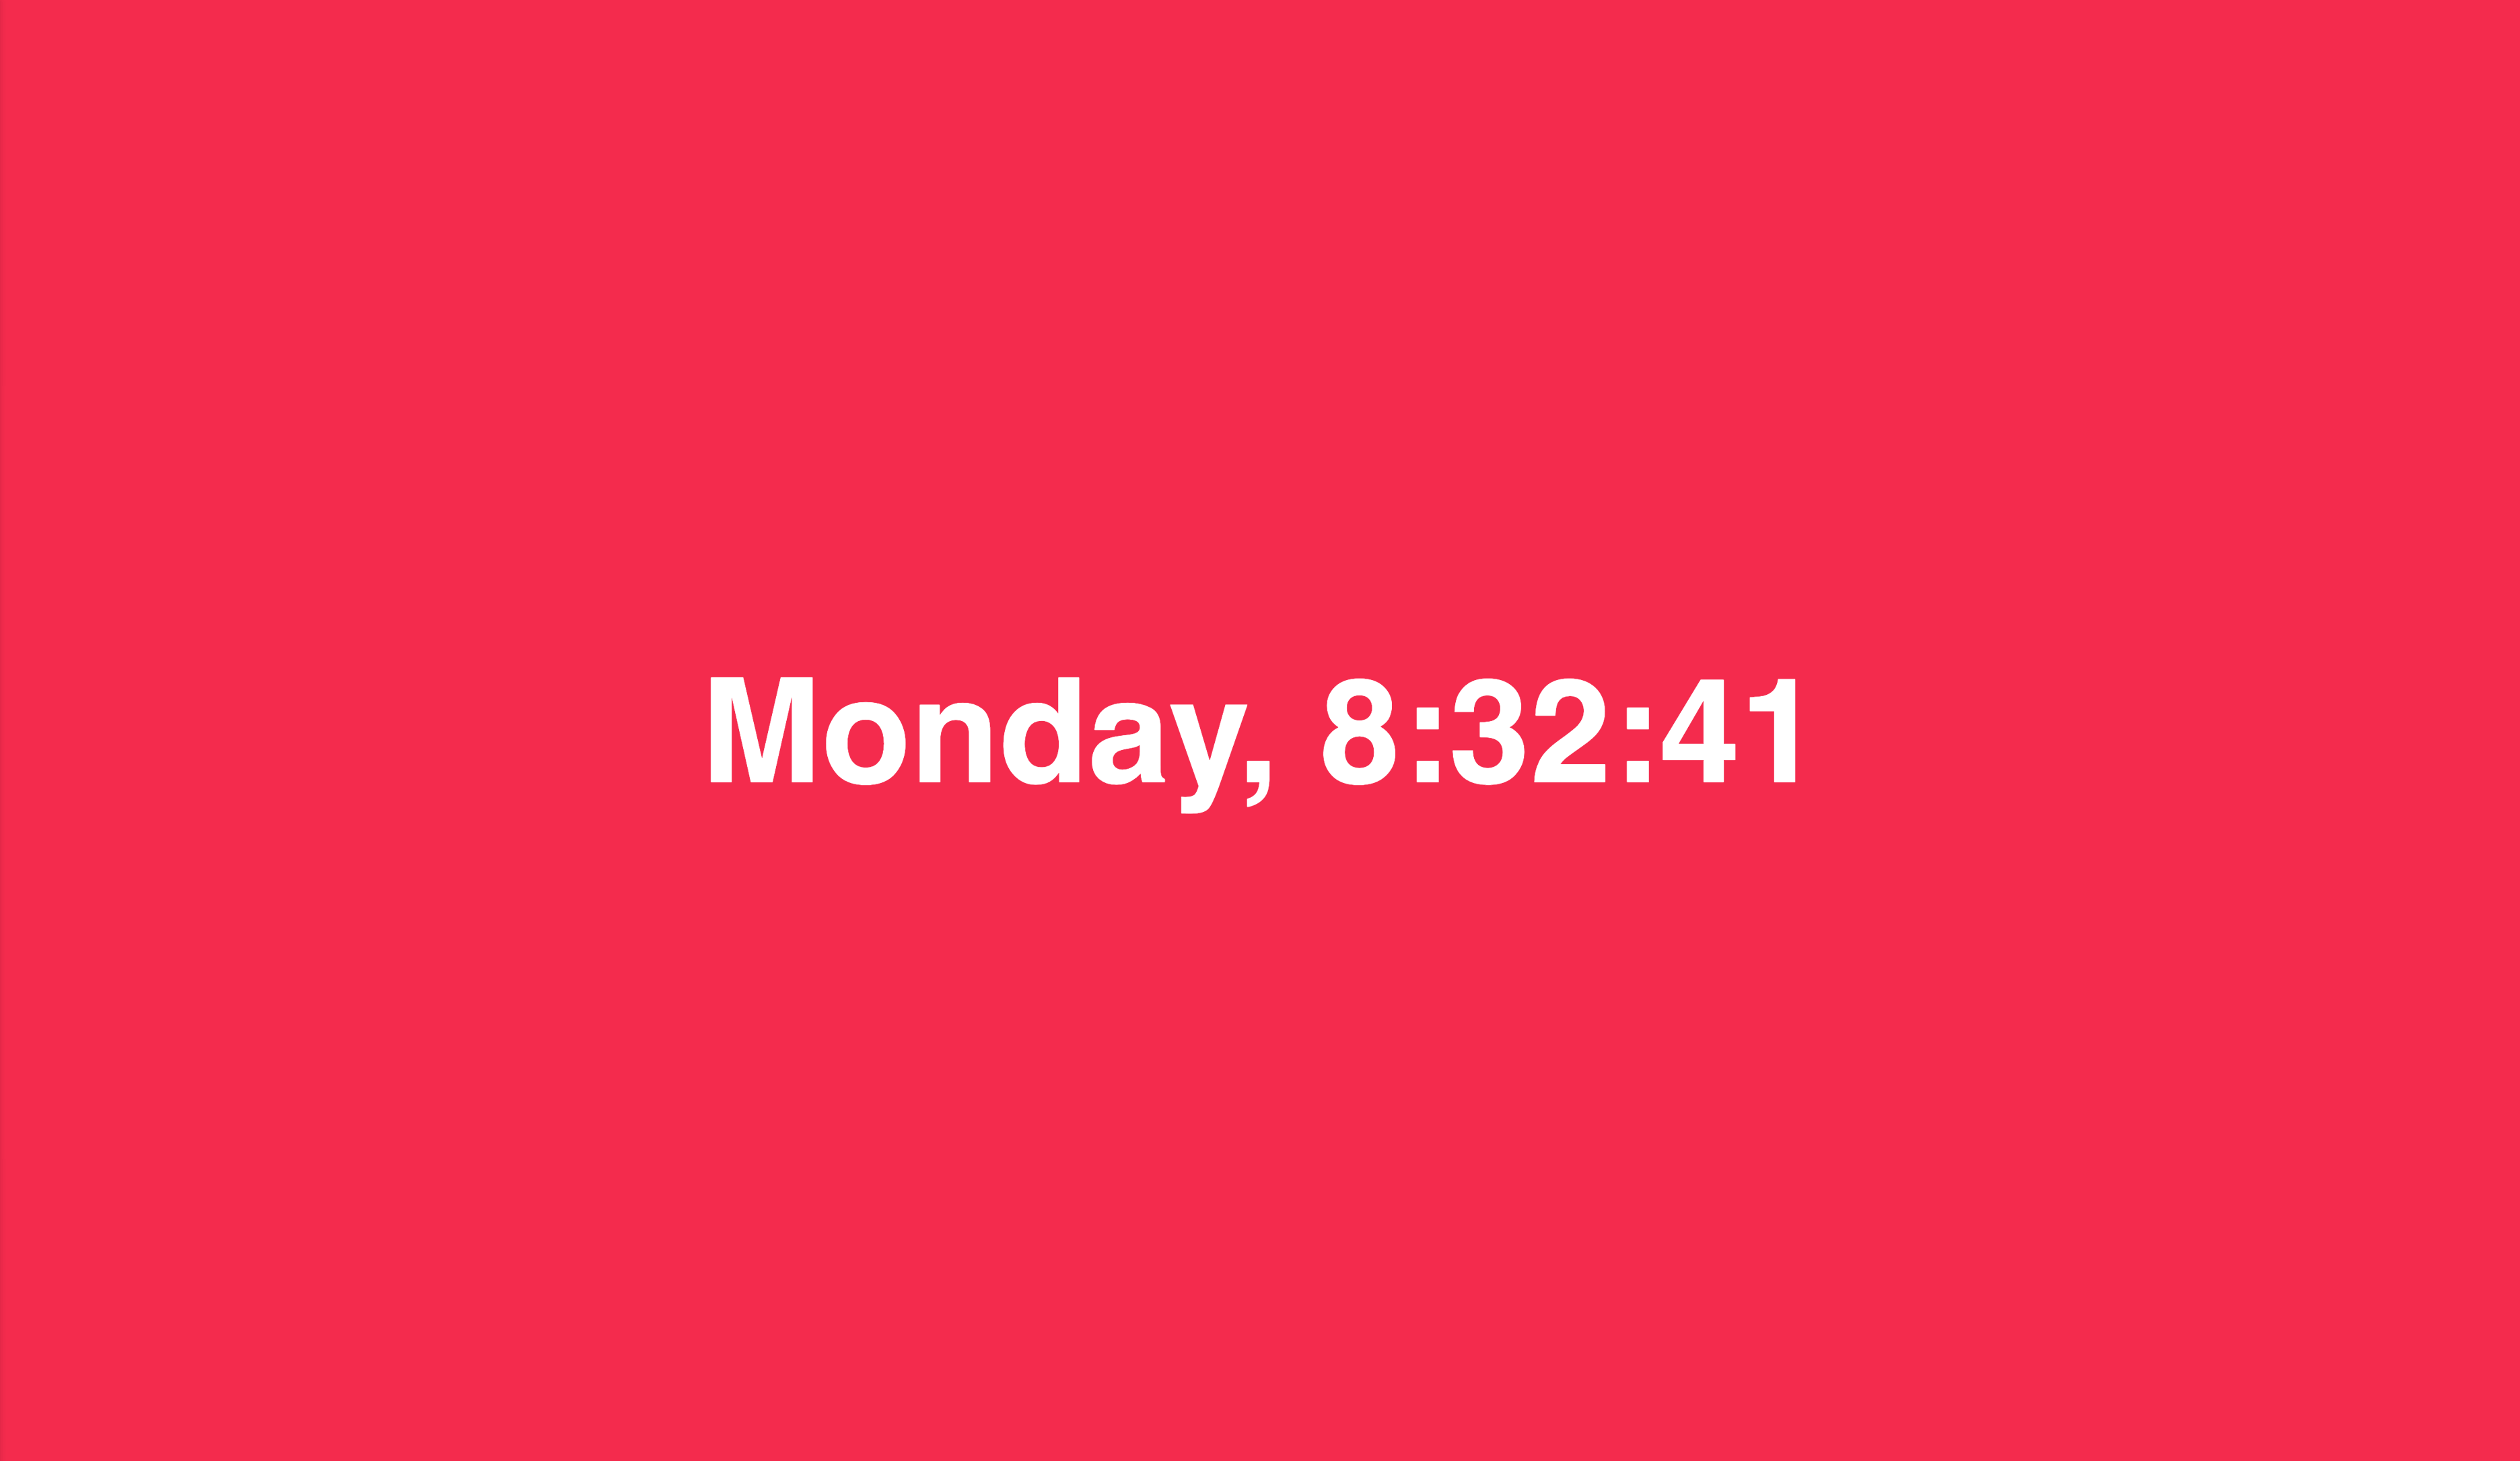 Weekday and time on a bright, red background